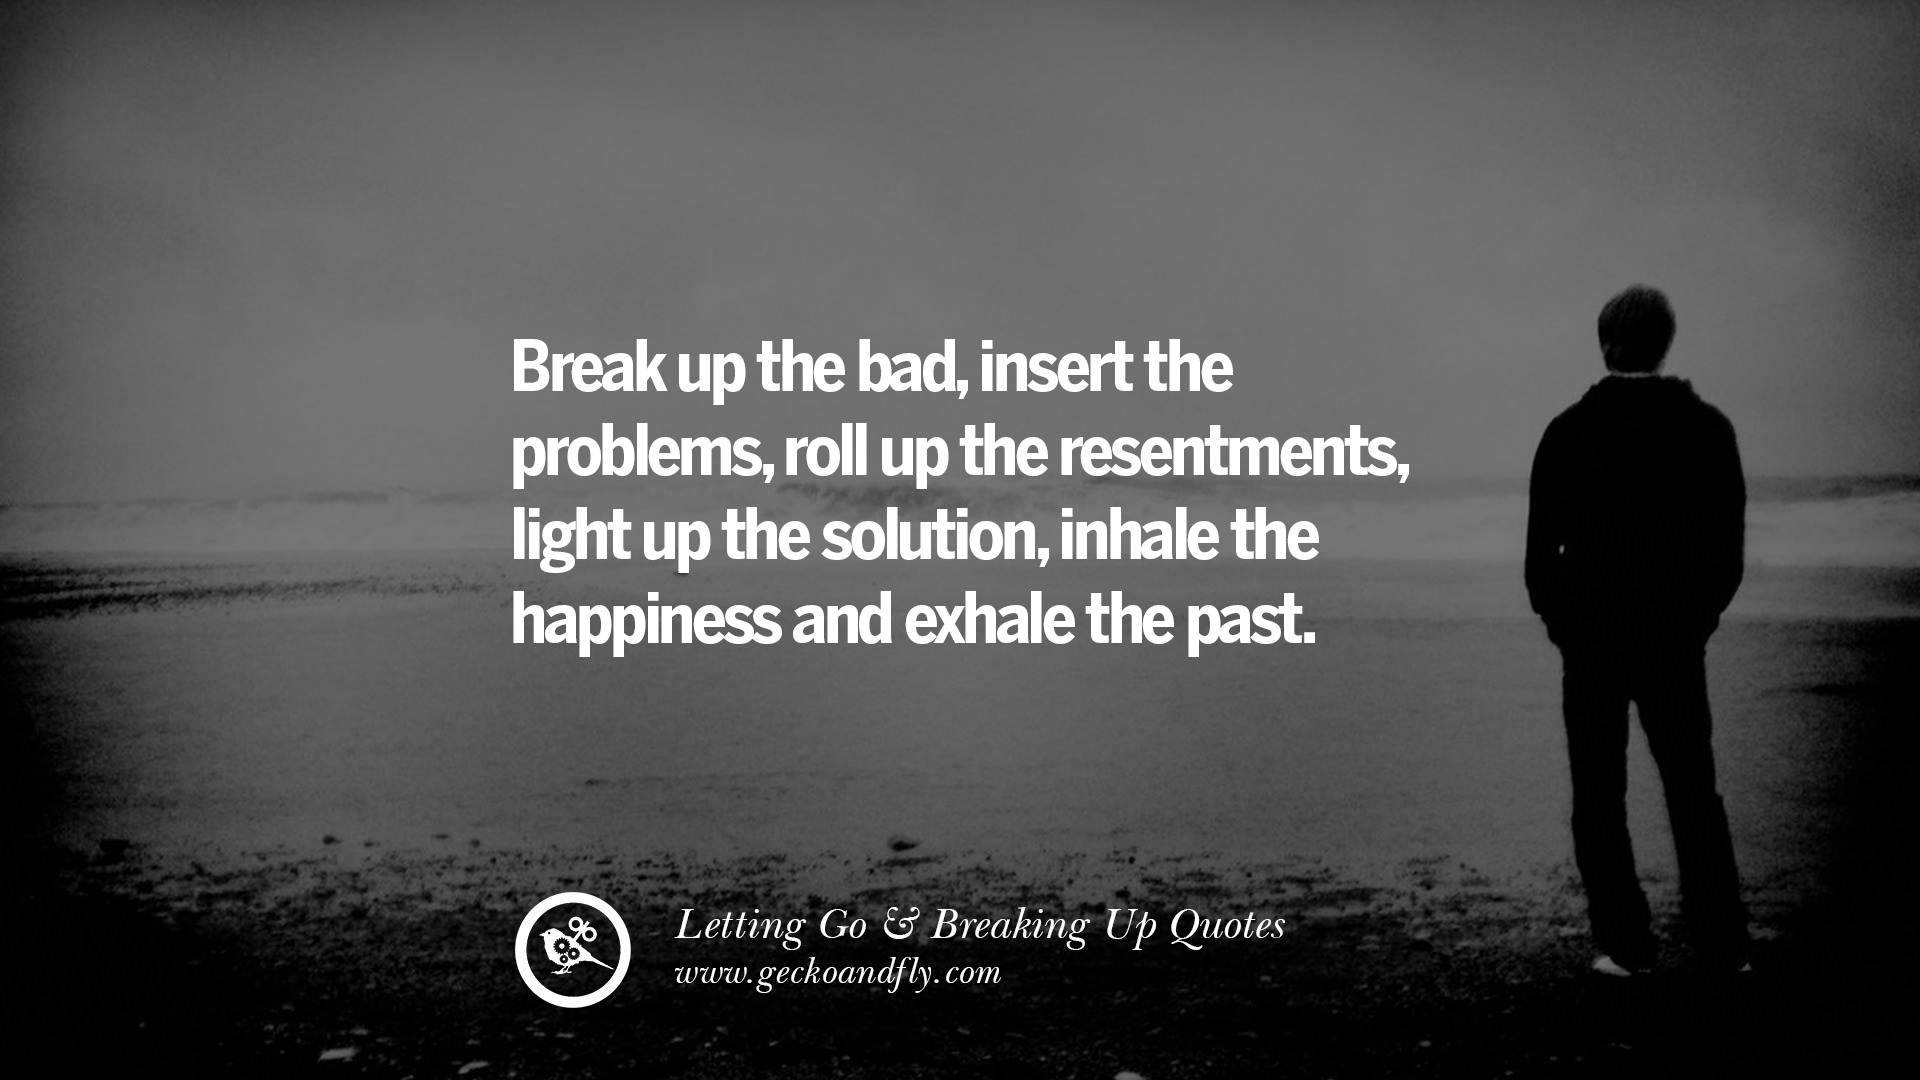 letting go breaking up quotes20